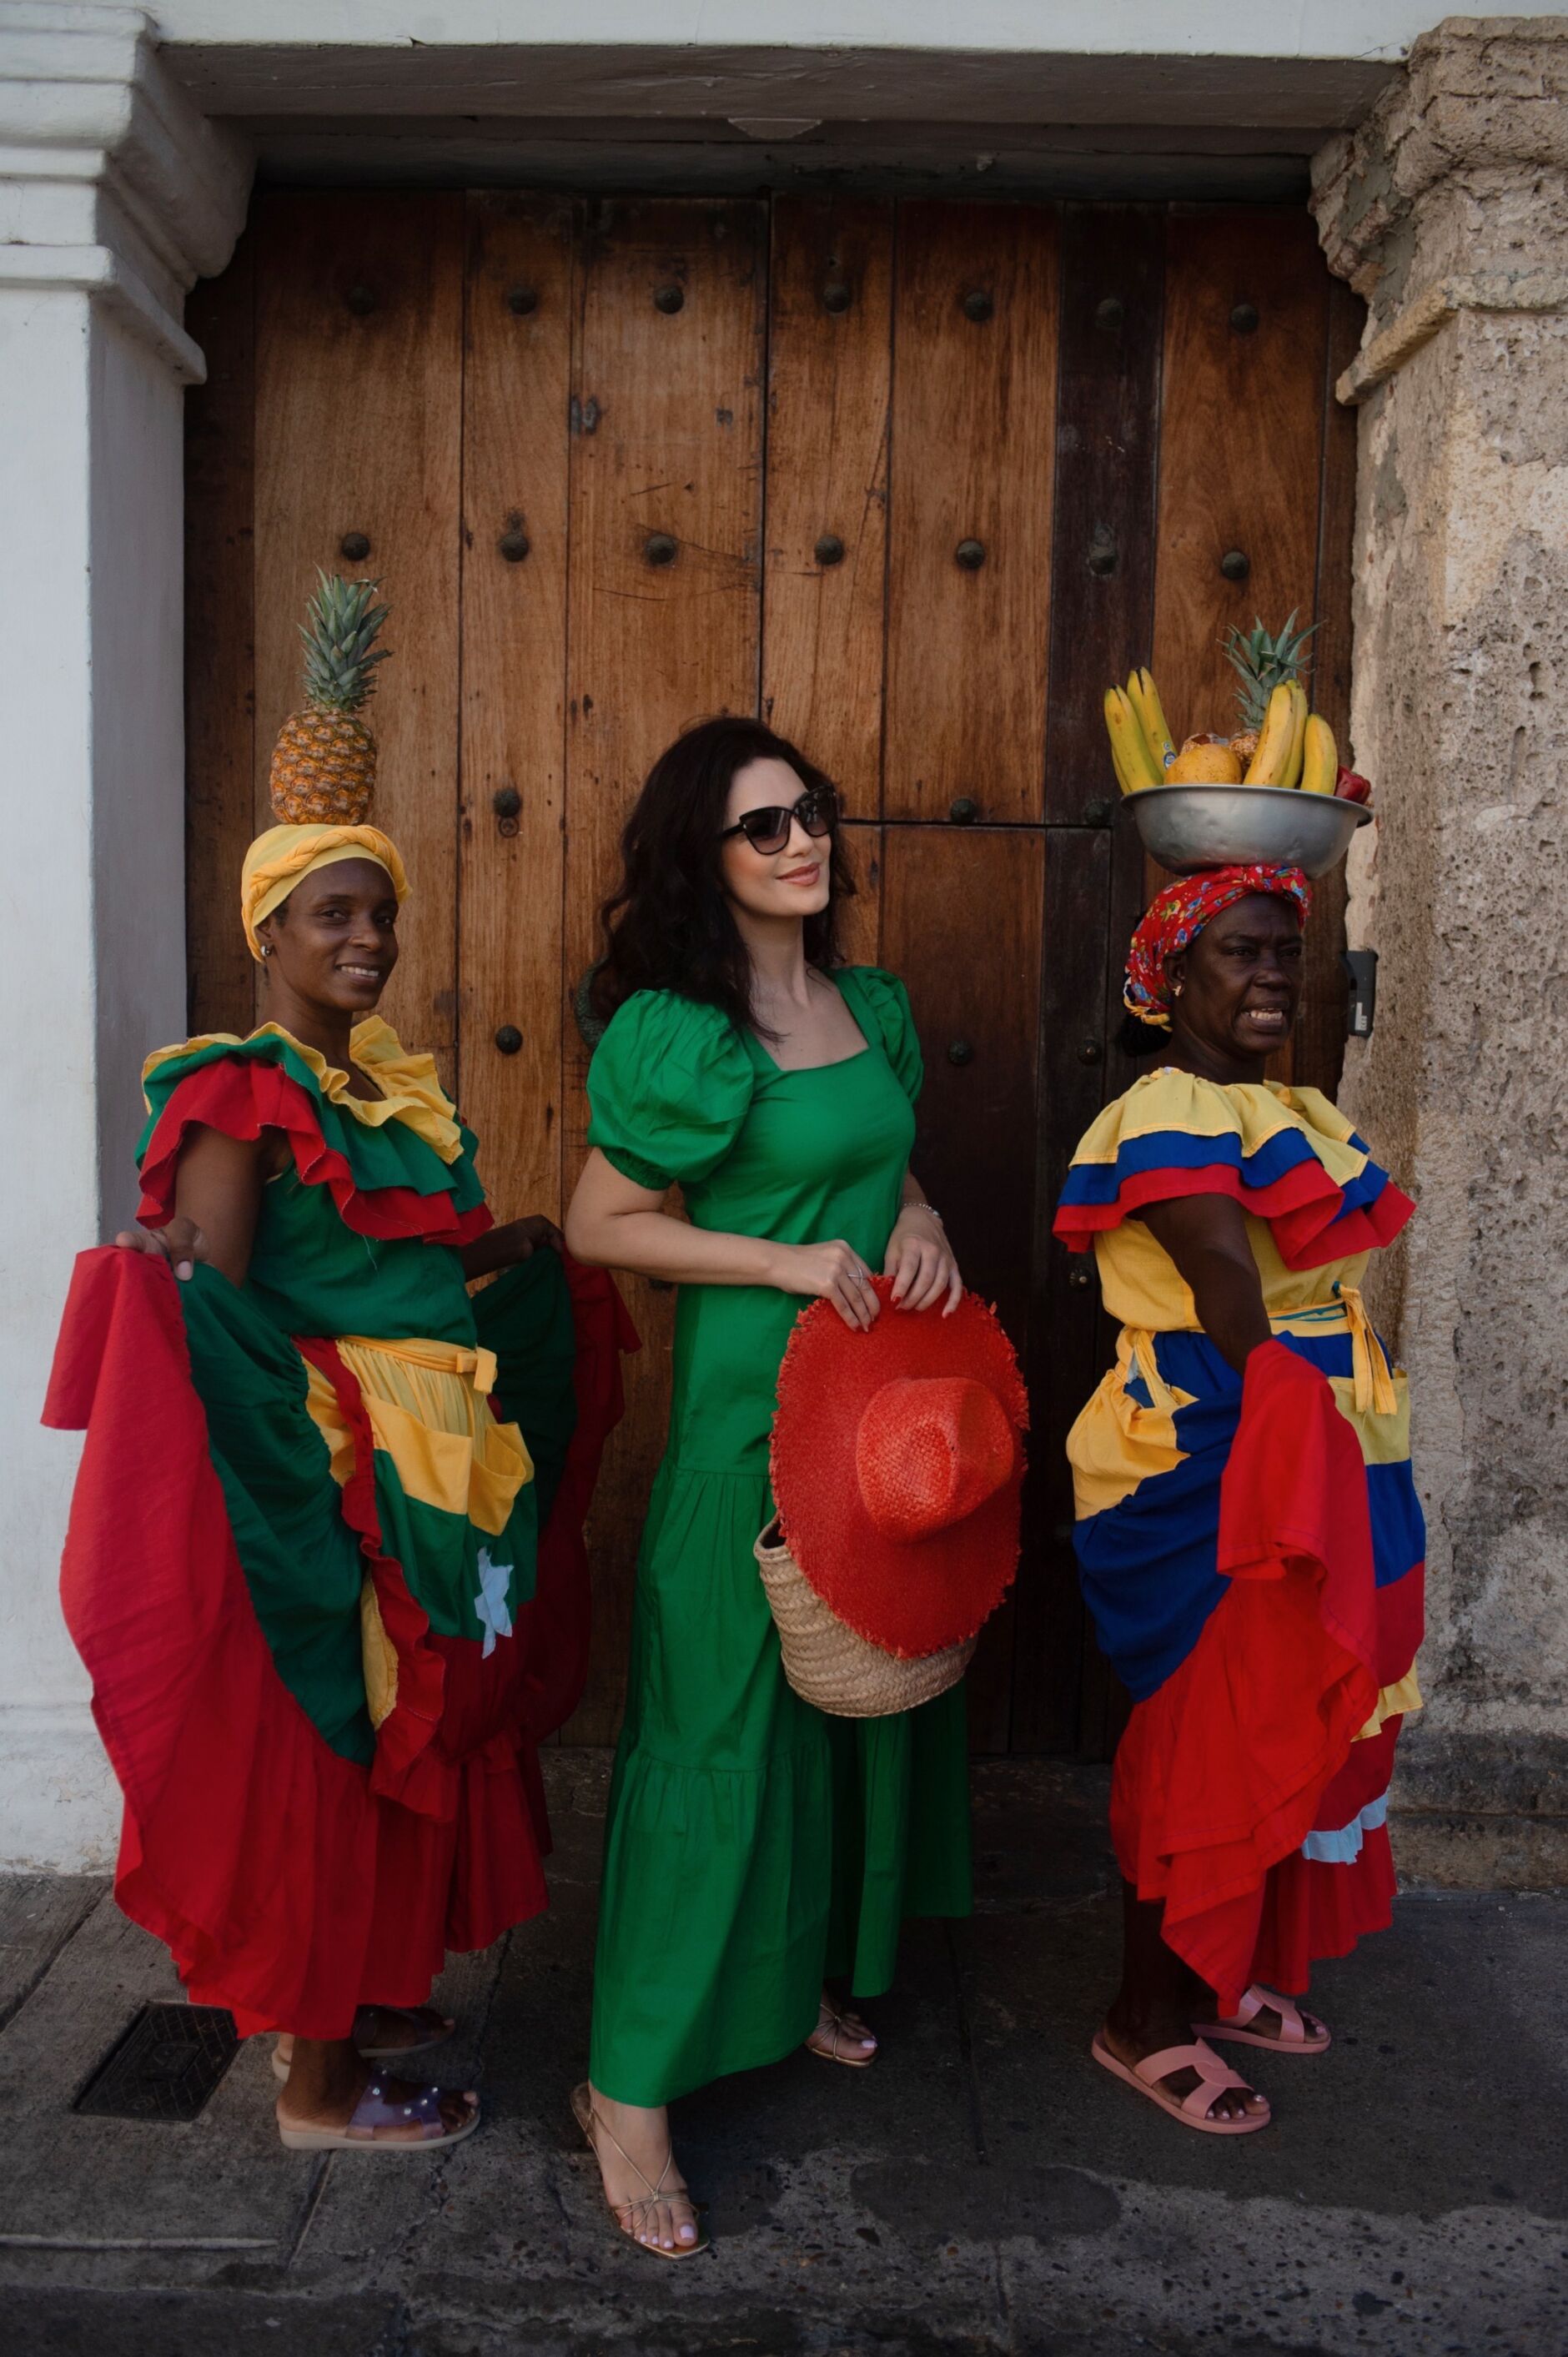 A TRAVEL GUIDE TO SOUTH AMERICA’S MOST BEAUTIFUL CITY: CARTAGENA, COLOMBIA